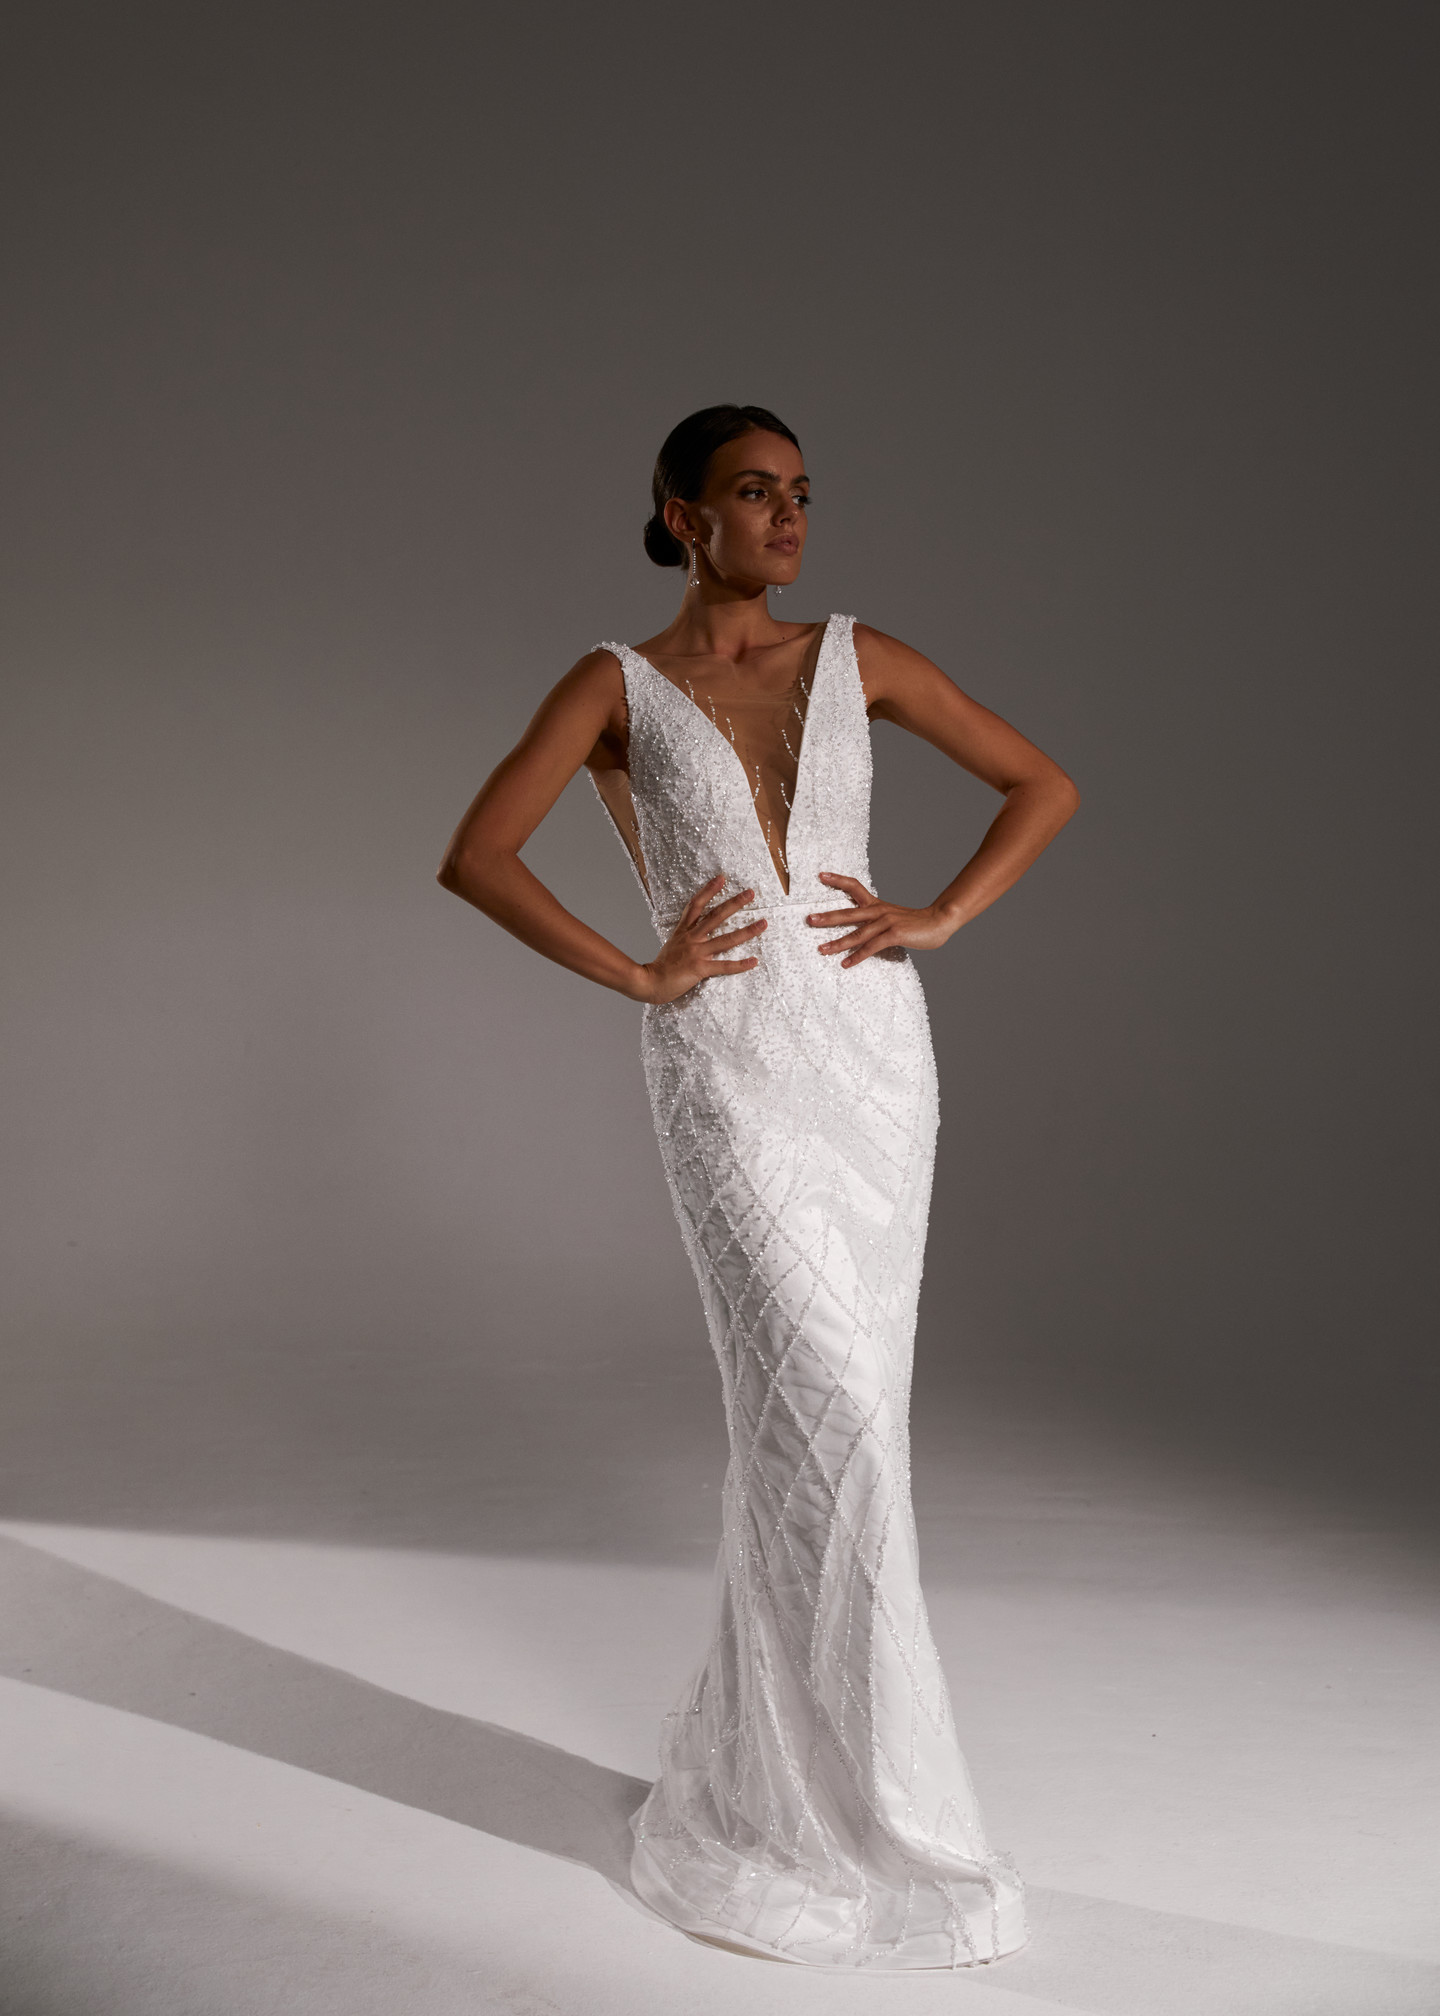 Federica dress, 2021, couture, dress, bridal, off-white, embroidery, sheath silhouette